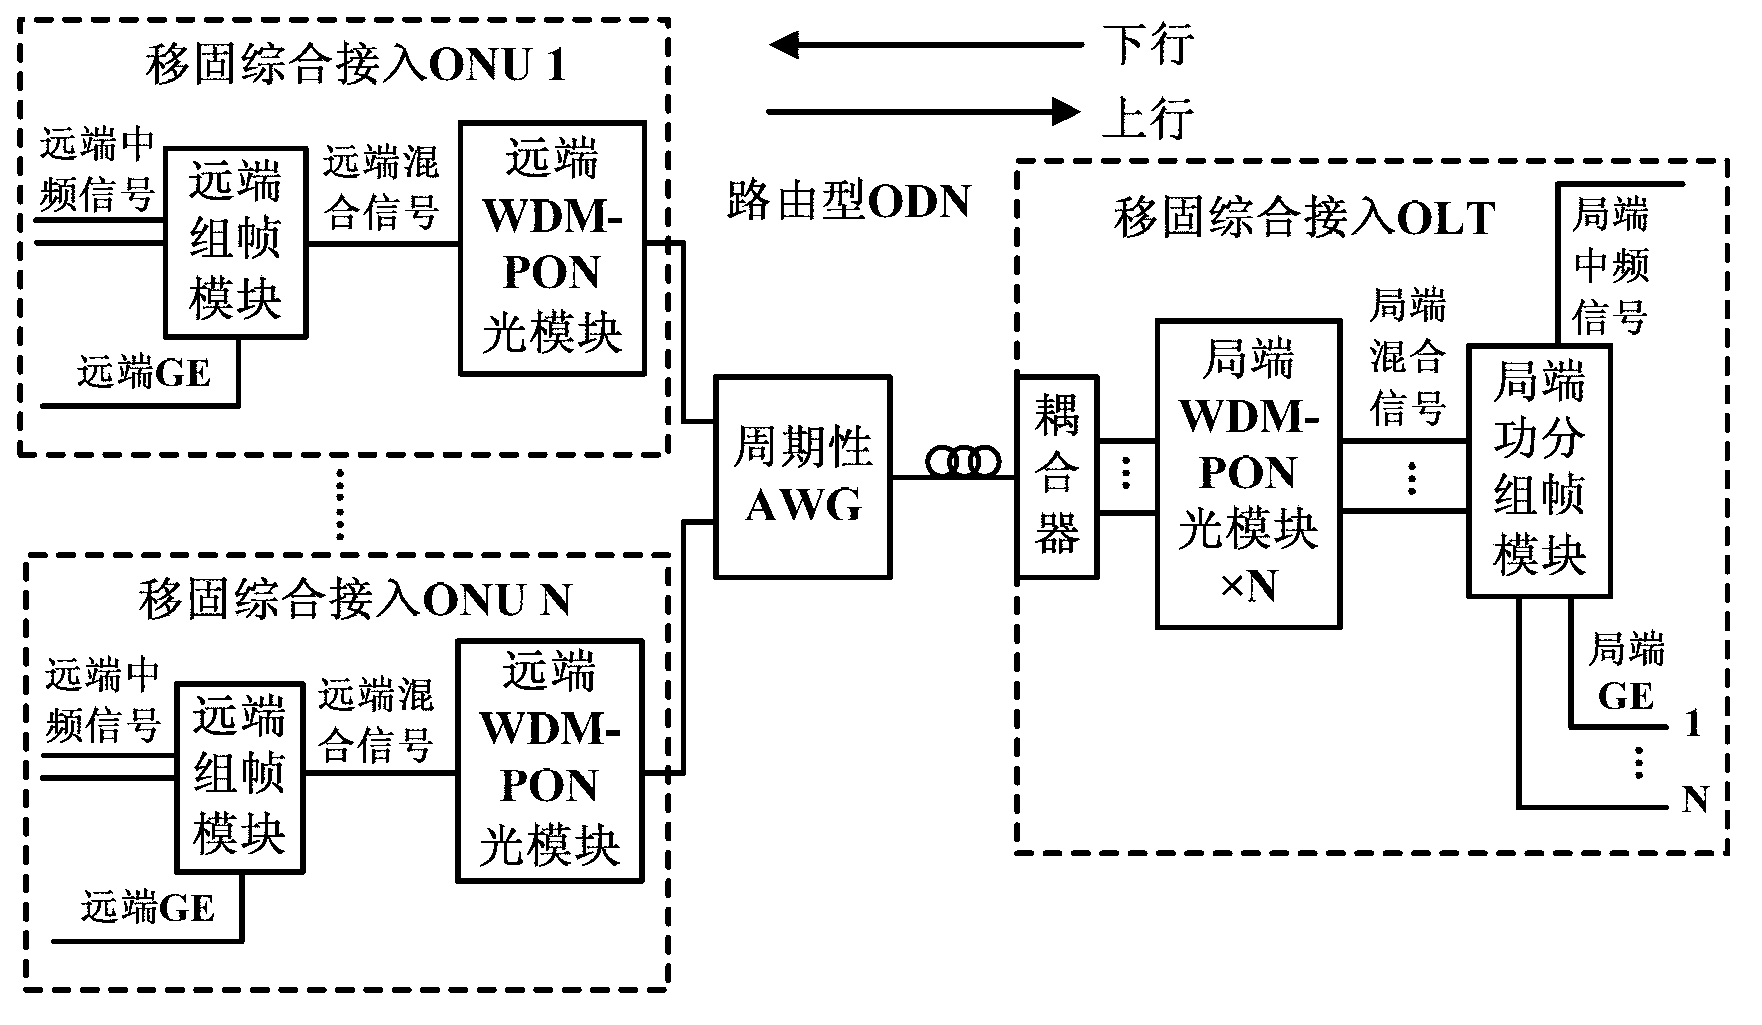 System and method for mobile and fixed comprehensive connection based on WDM-PON